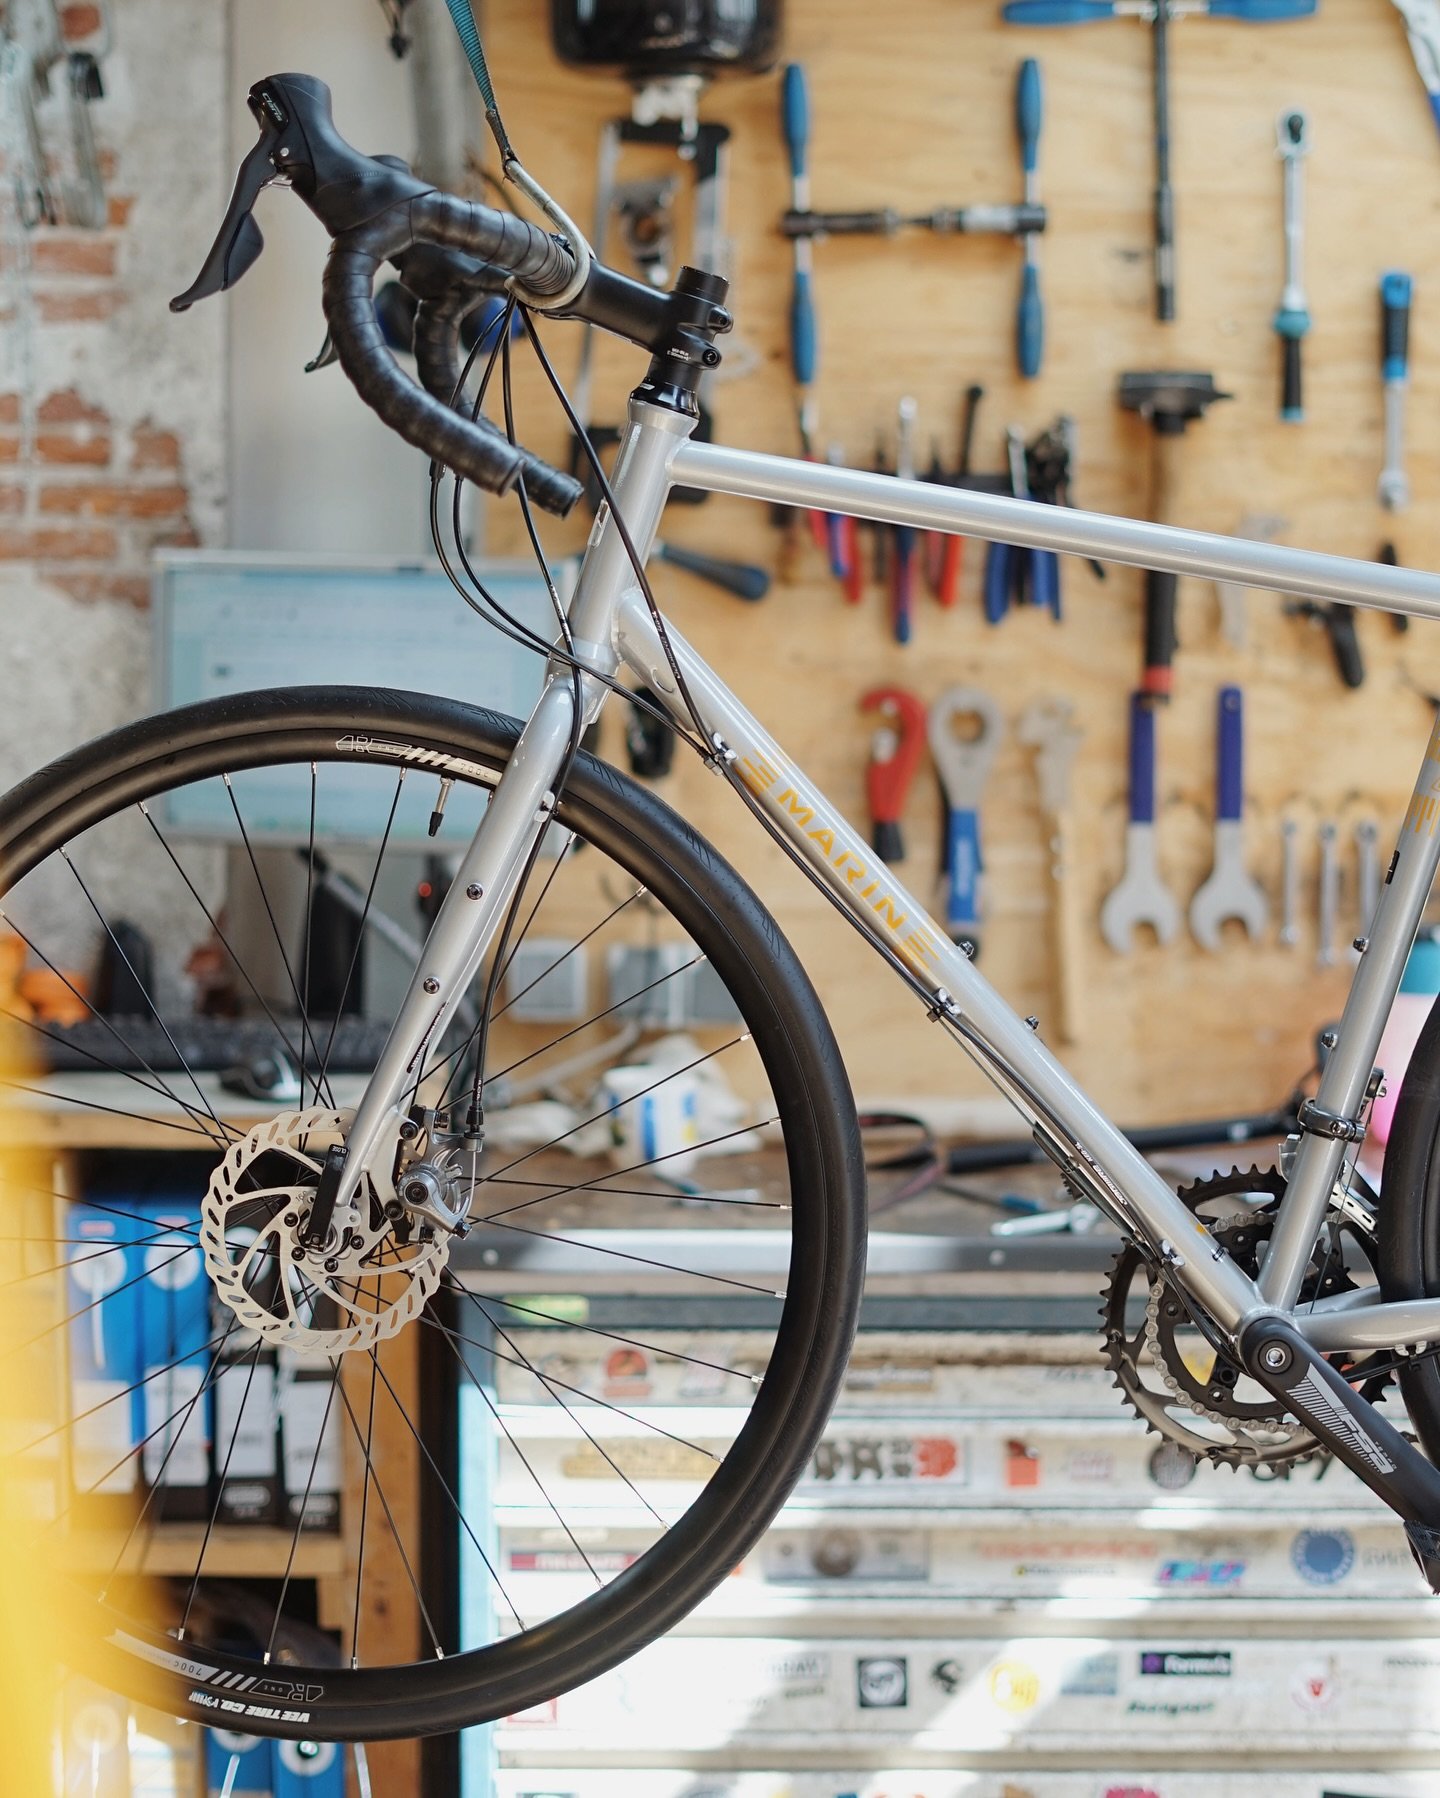 We&rsquo;re busy getting some new bikes on the road for these first sunny days of the year 🙏 For instance this @marinbikes Nicasio, ready for any all-road adventure without breaking the bank!

Are you looking for a fresh ride? Check out our bikes at